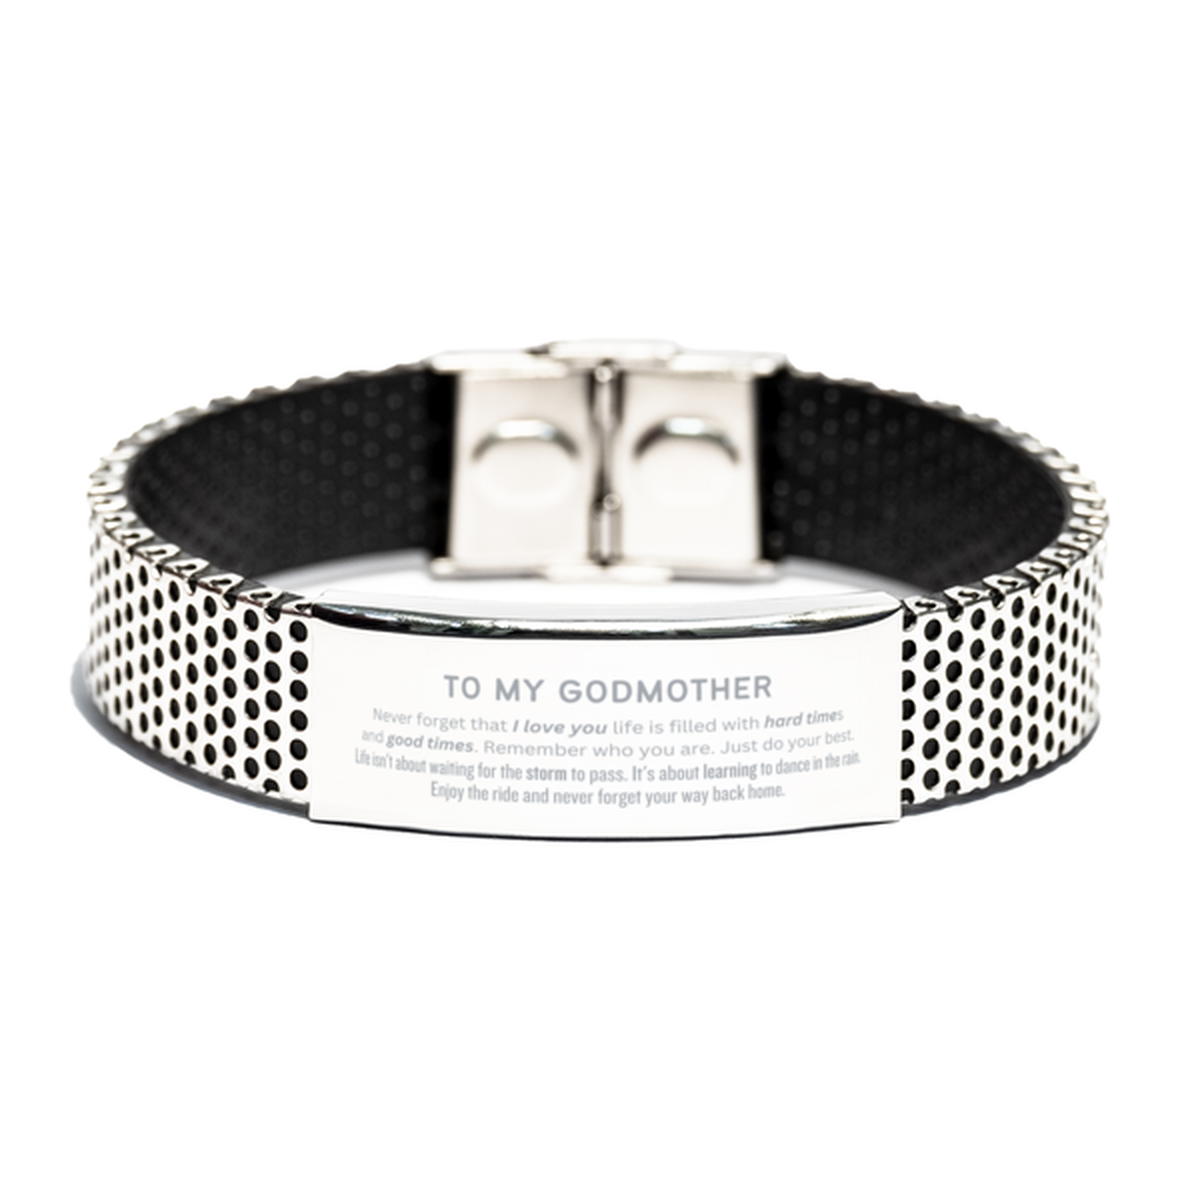 Christmas Godmother Stainless Steel Bracelet Gifts, To My Godmother Birthday Thank You Gifts For Godmother, Graduation Unique Gifts For Godmother To My Godmother Never forget that I love you life is filled with hard times and good times. Remember who you